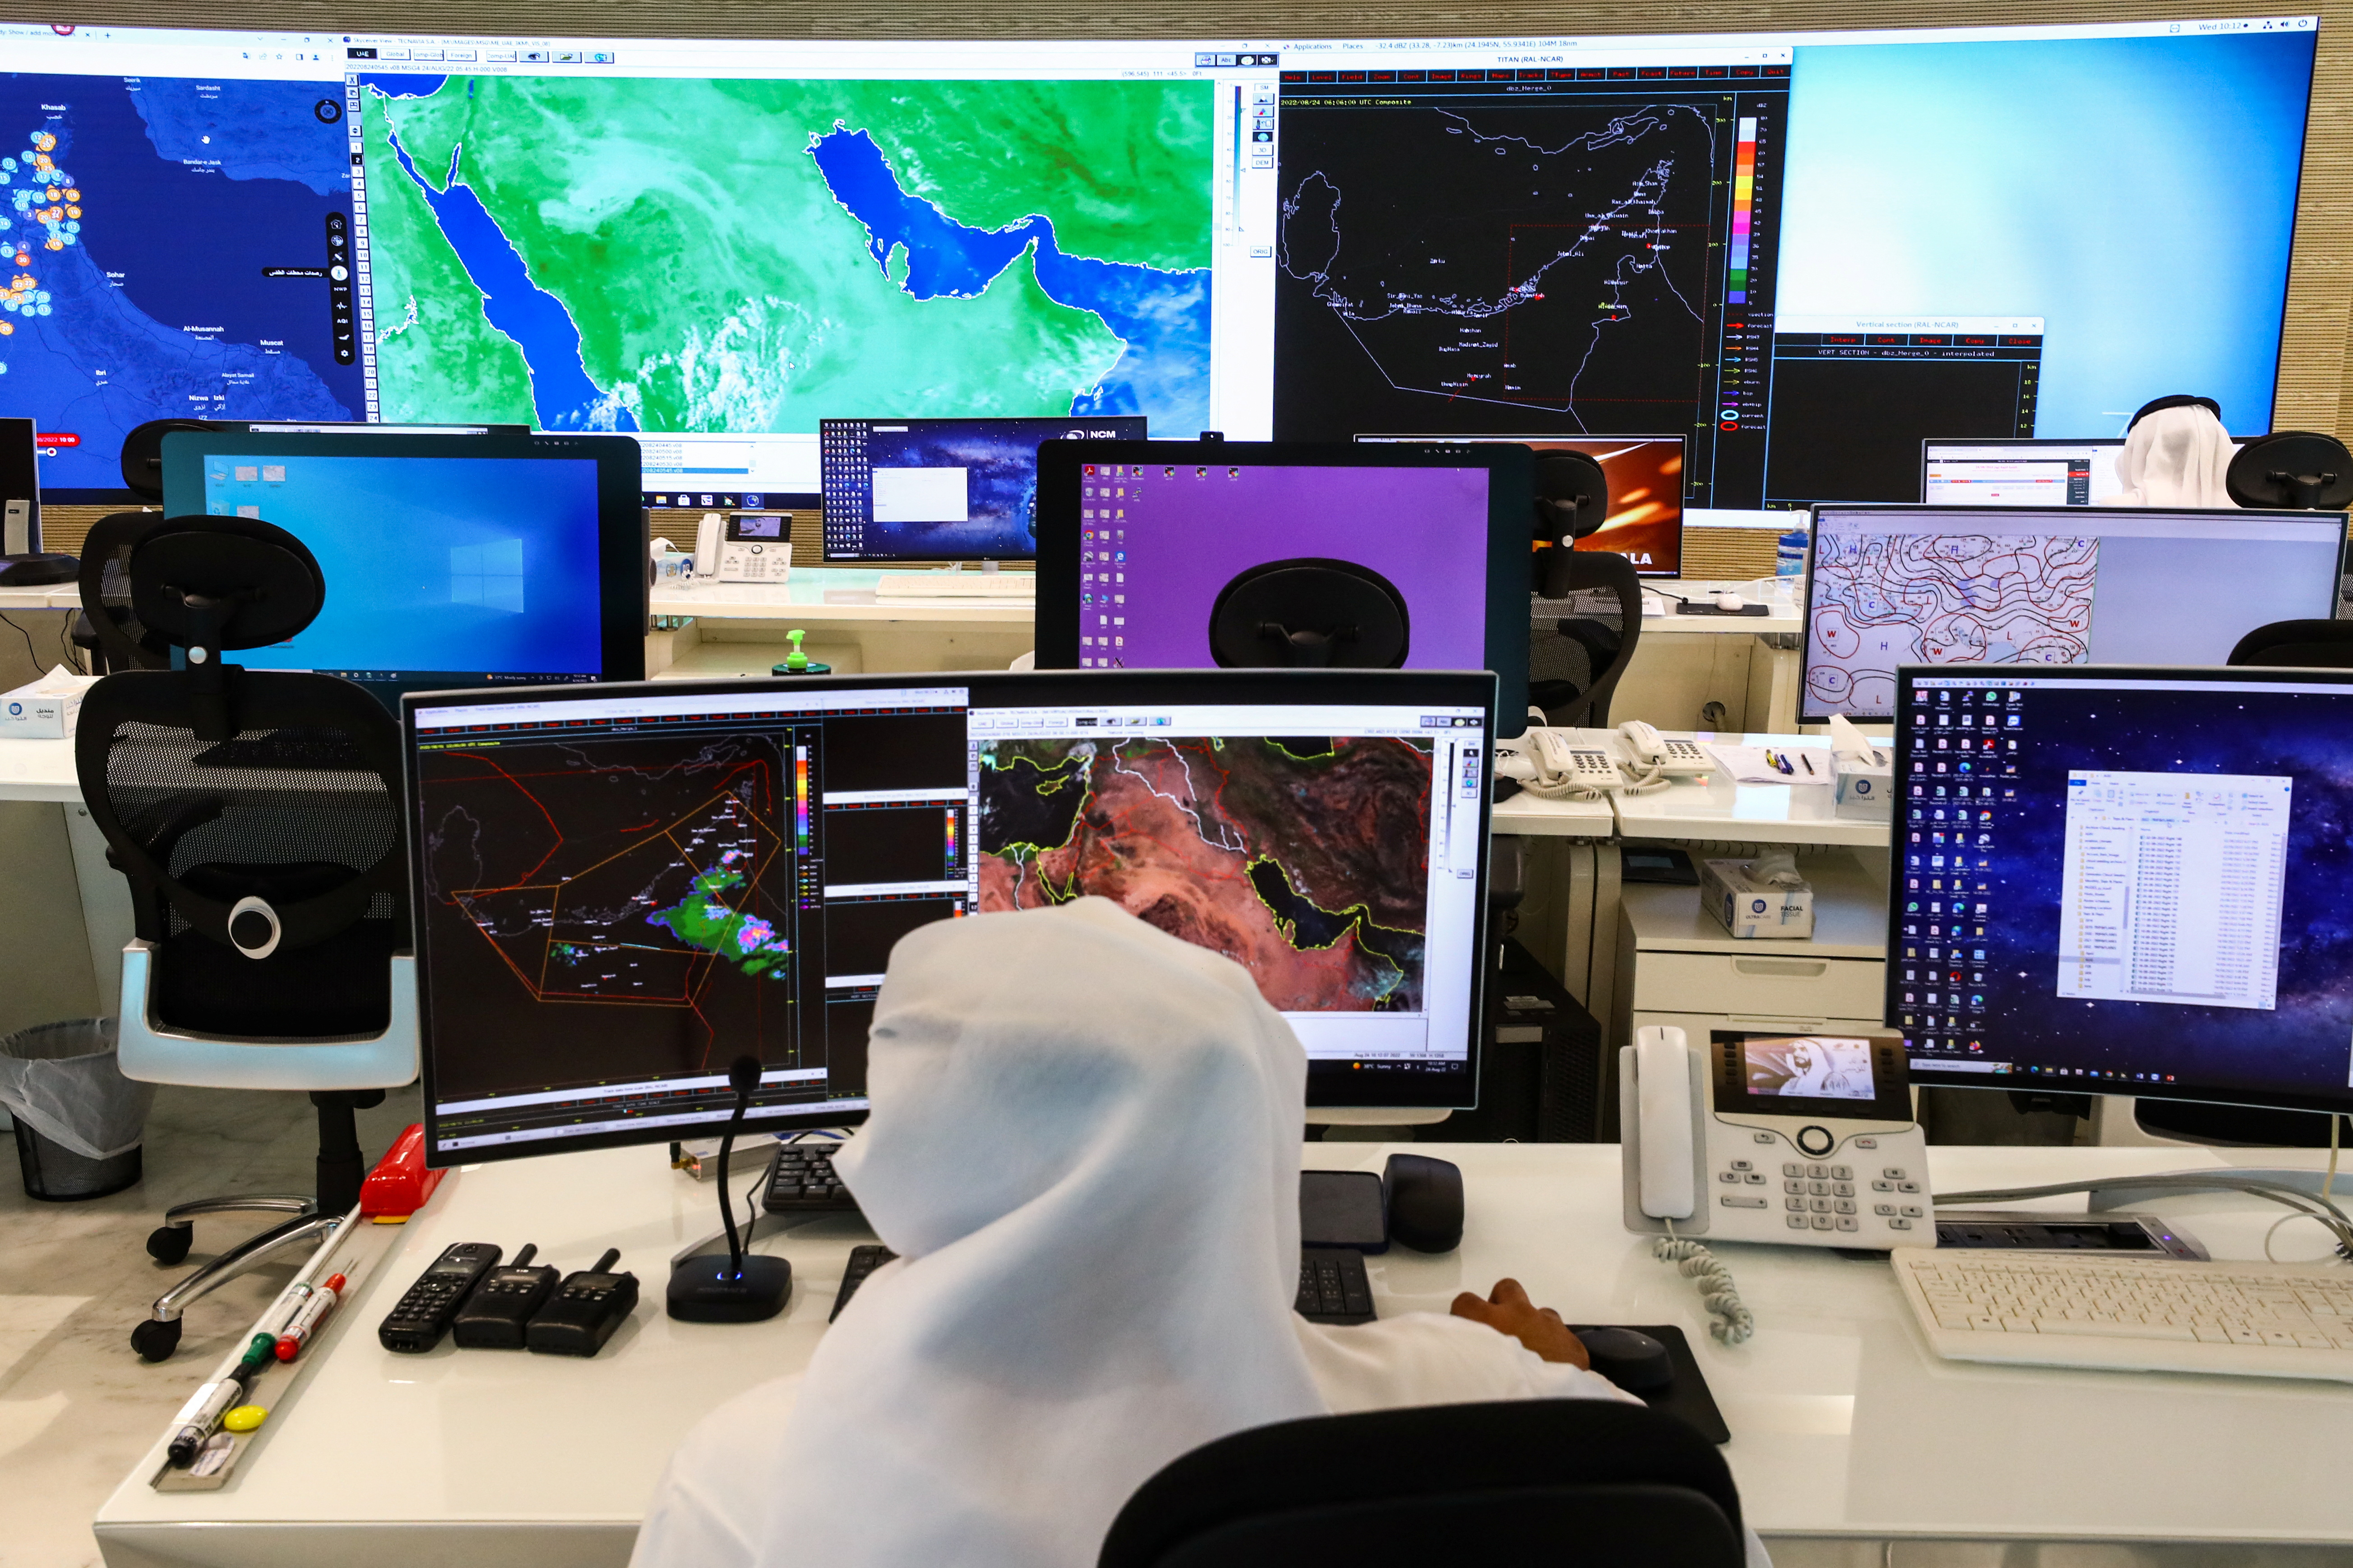 An inside view of the control room at the National Center of Meteorology in Abu Dhabi